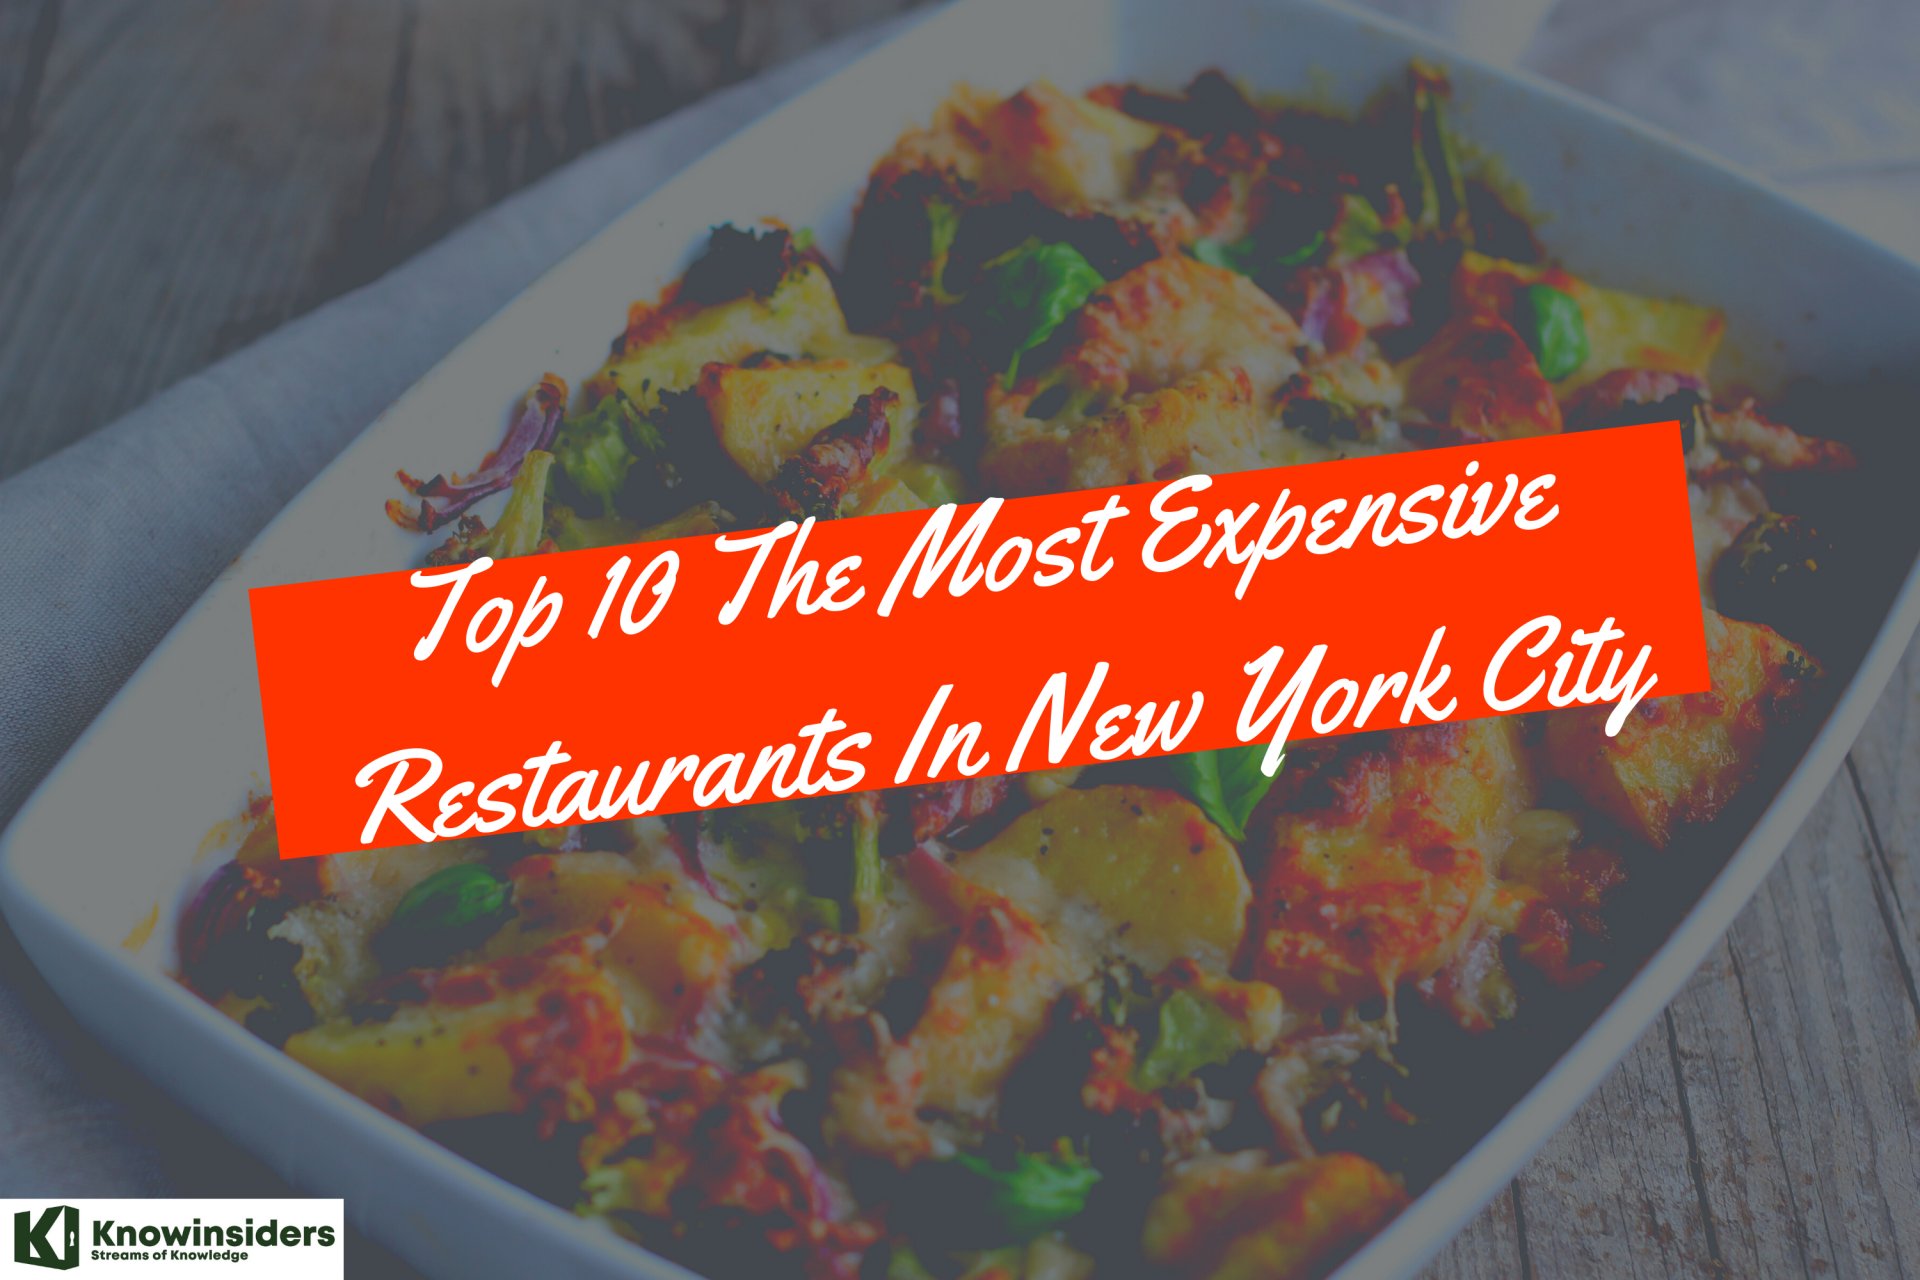 Top 10 The Most Expensive Restaurants In New York City